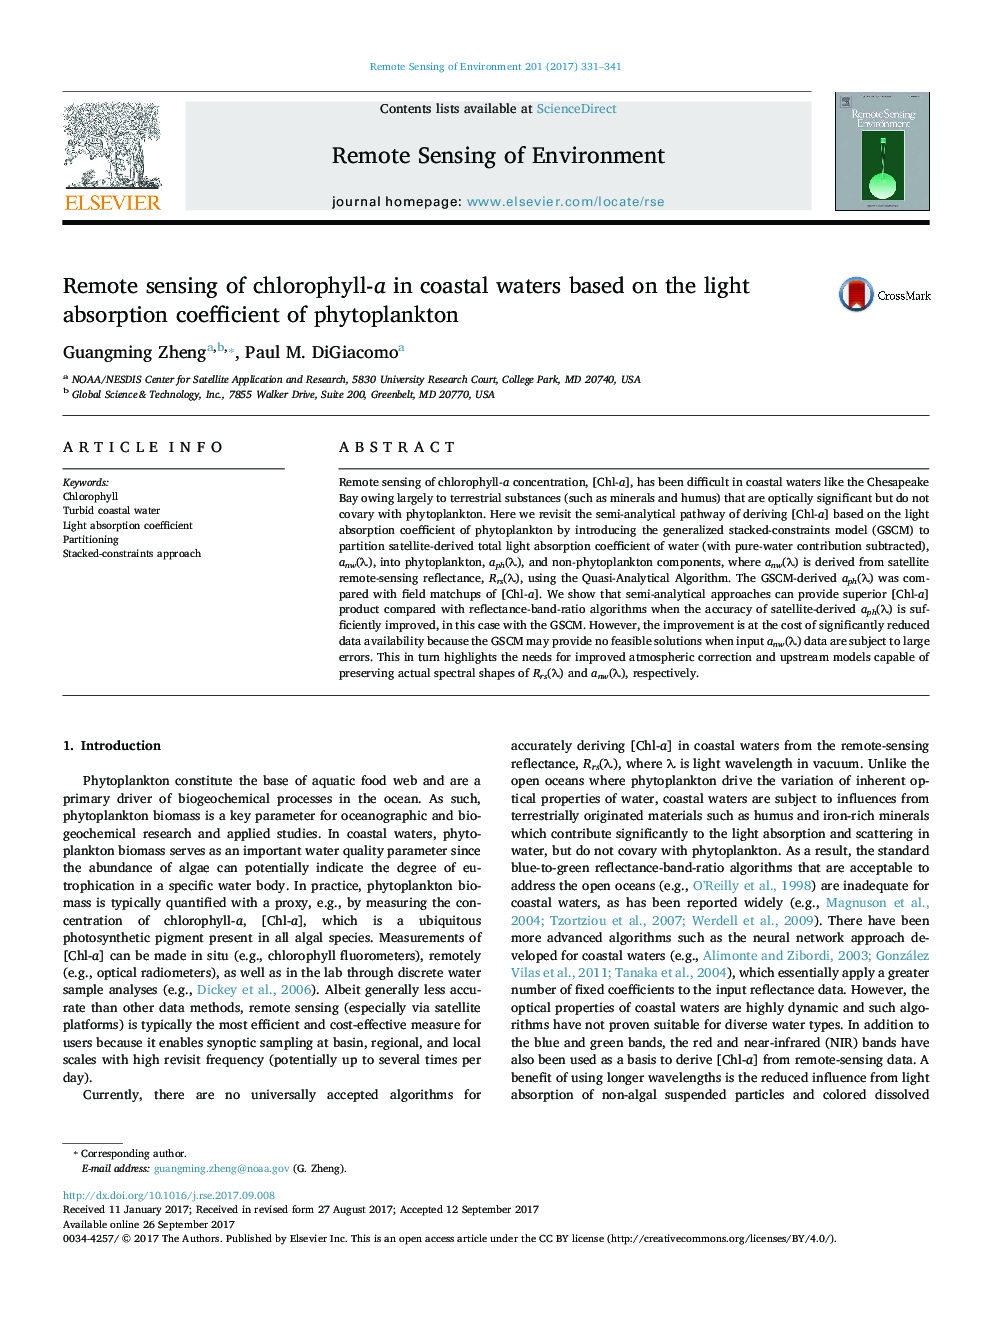 Remote sensing of chlorophyll-a in coastal waters based on the light absorption coefficient of phytoplankton